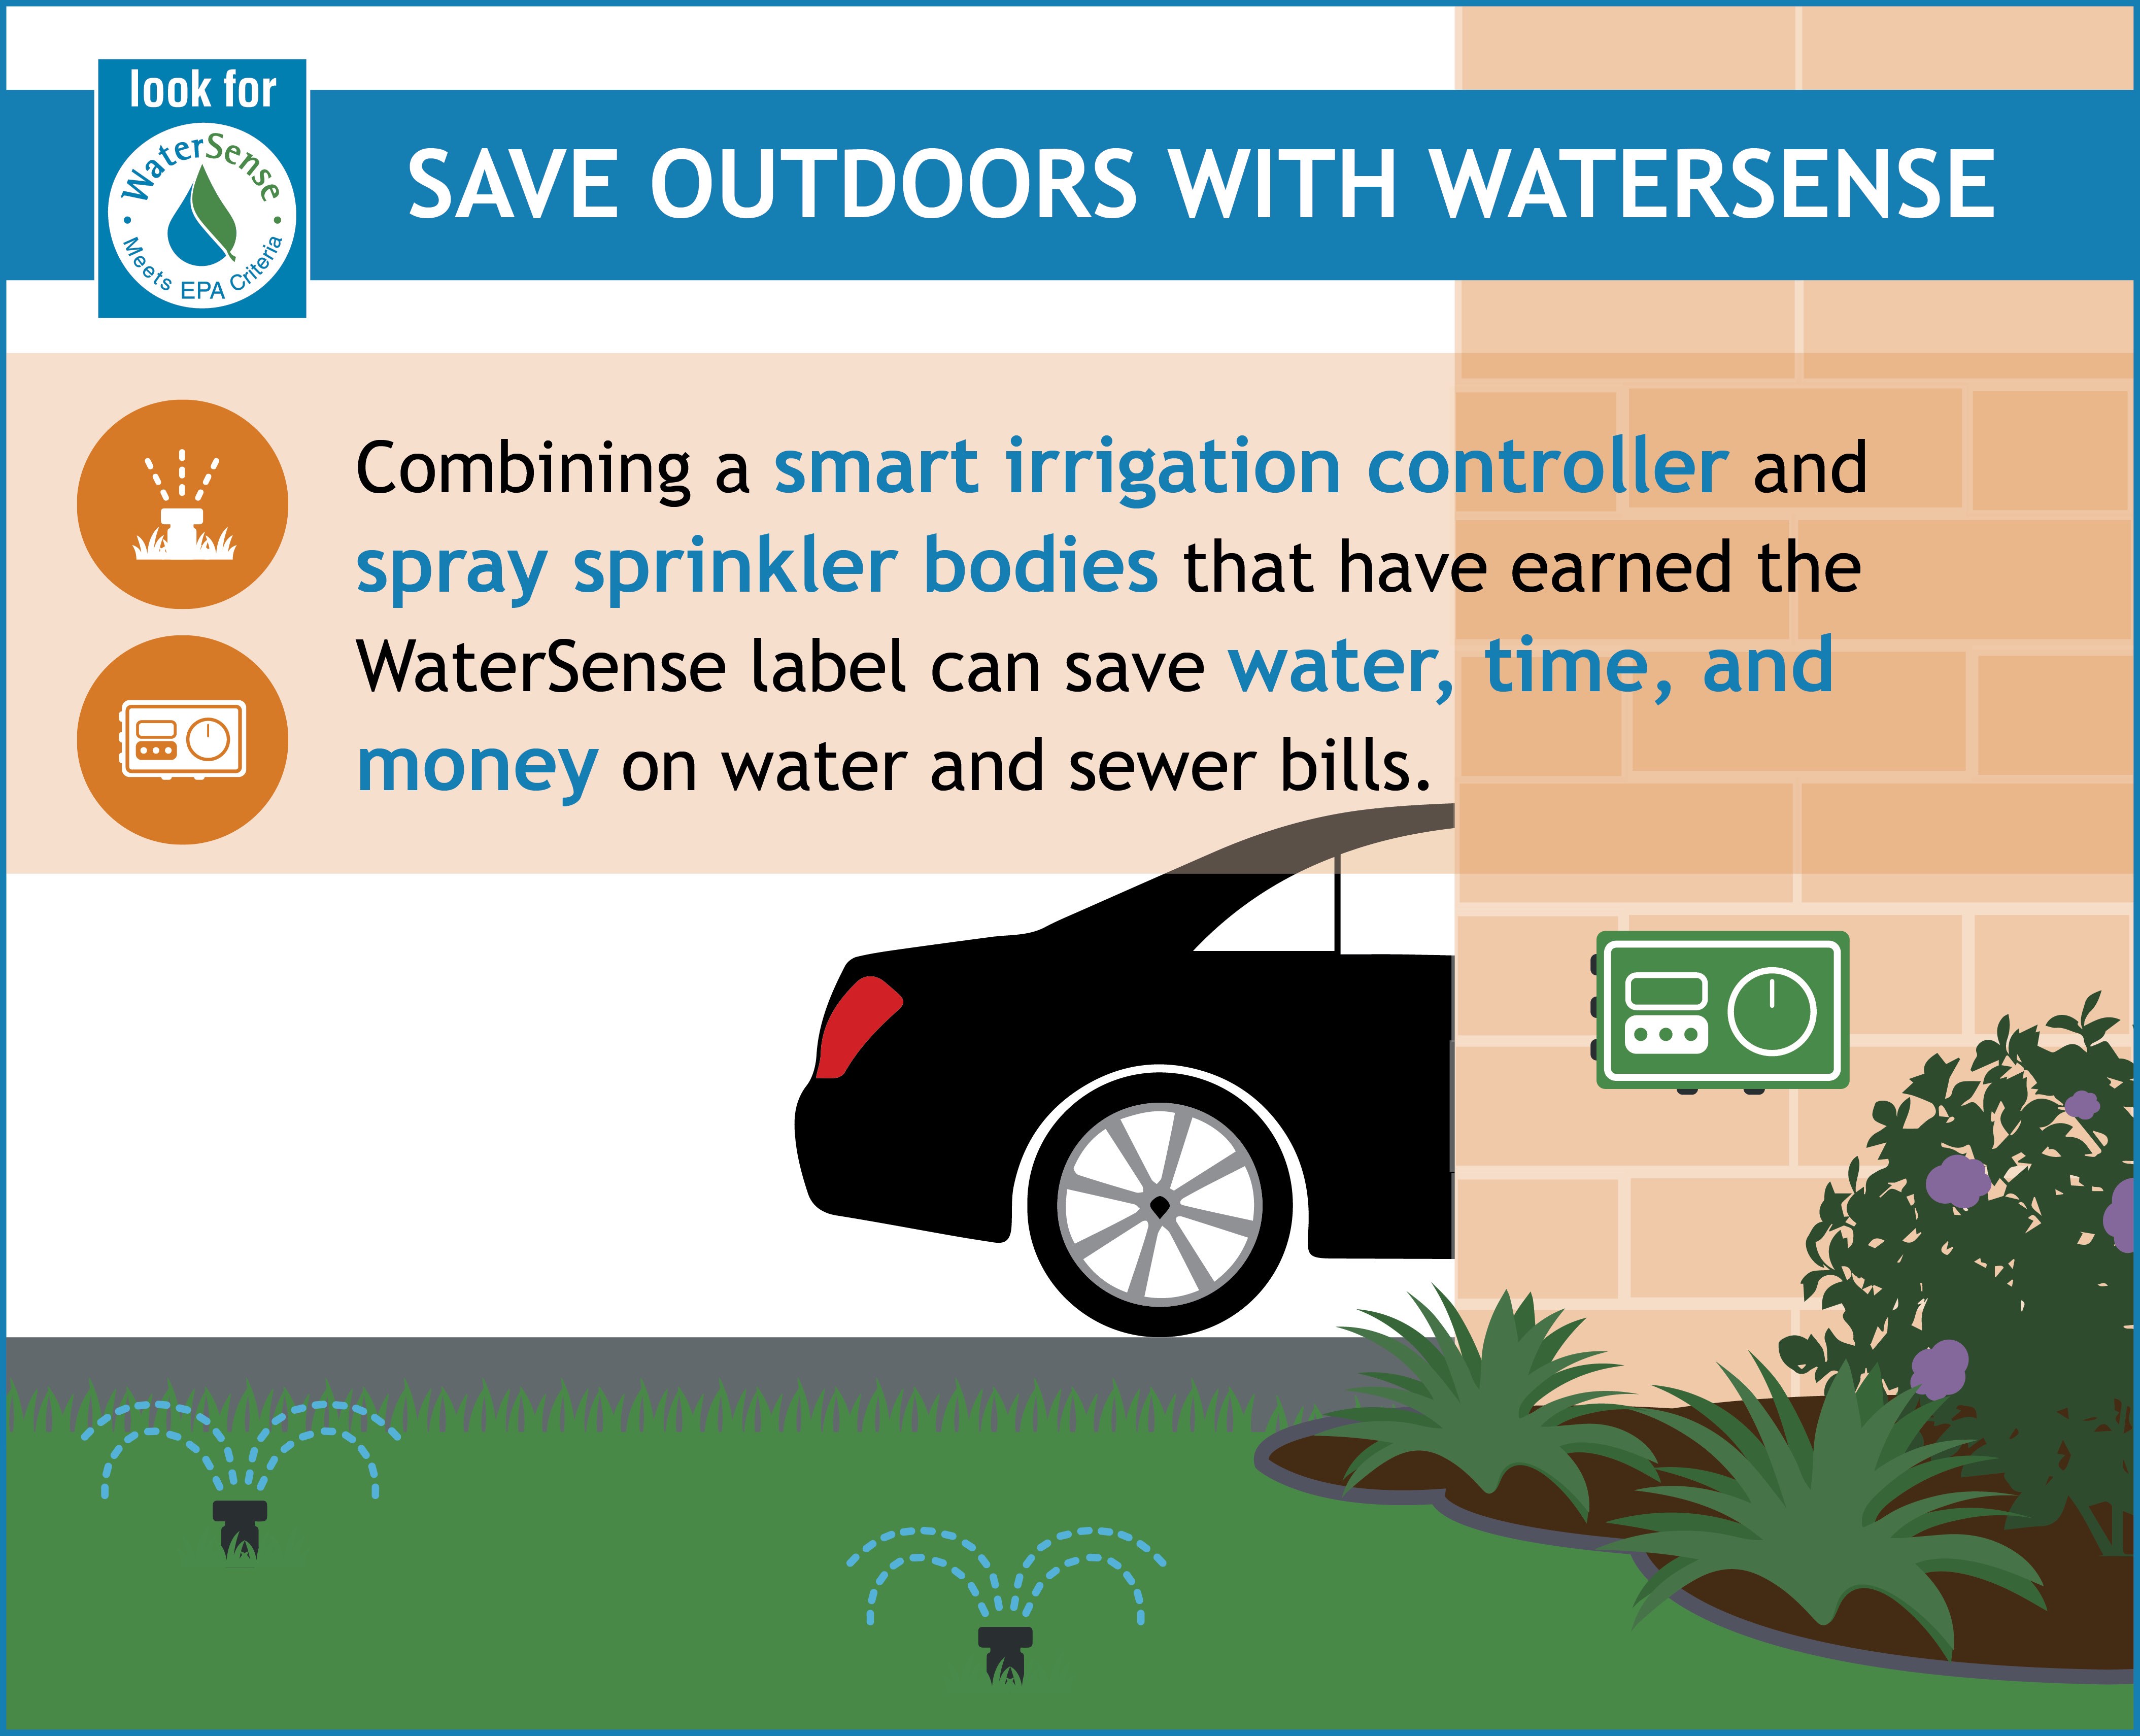 Save outdoors with watersense infographic